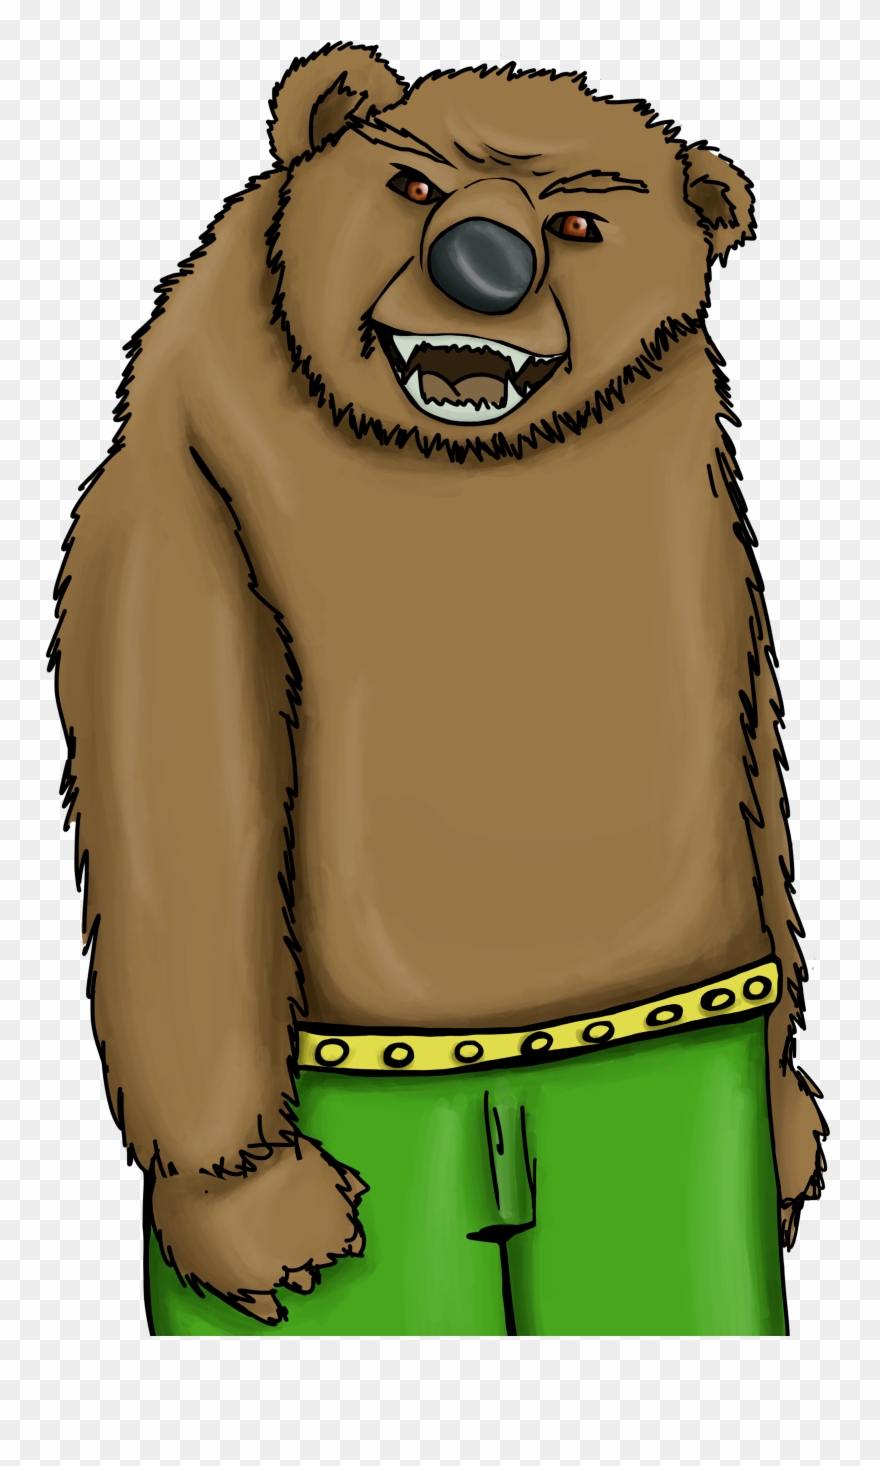 The Bear Is Designed To Look Like The Real Bear, But.